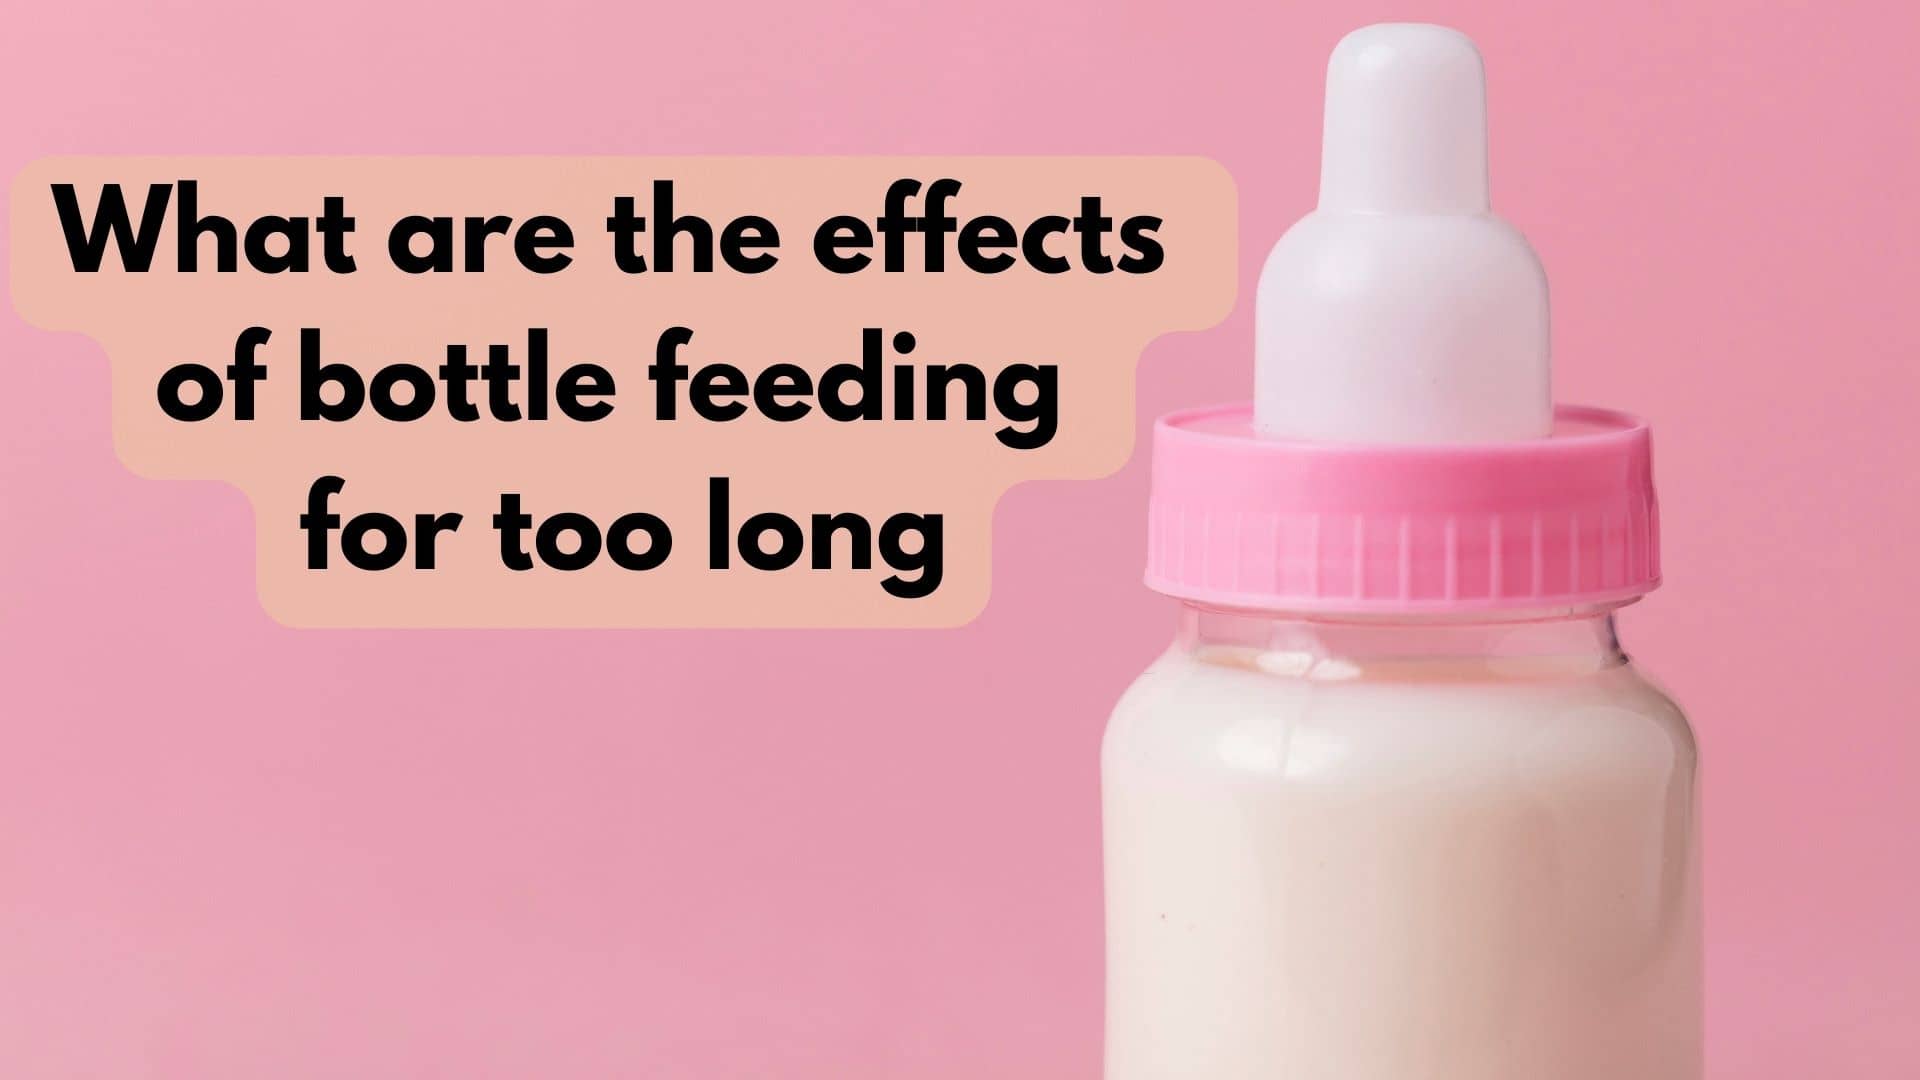 What are the effects of bottle feeding for too long?